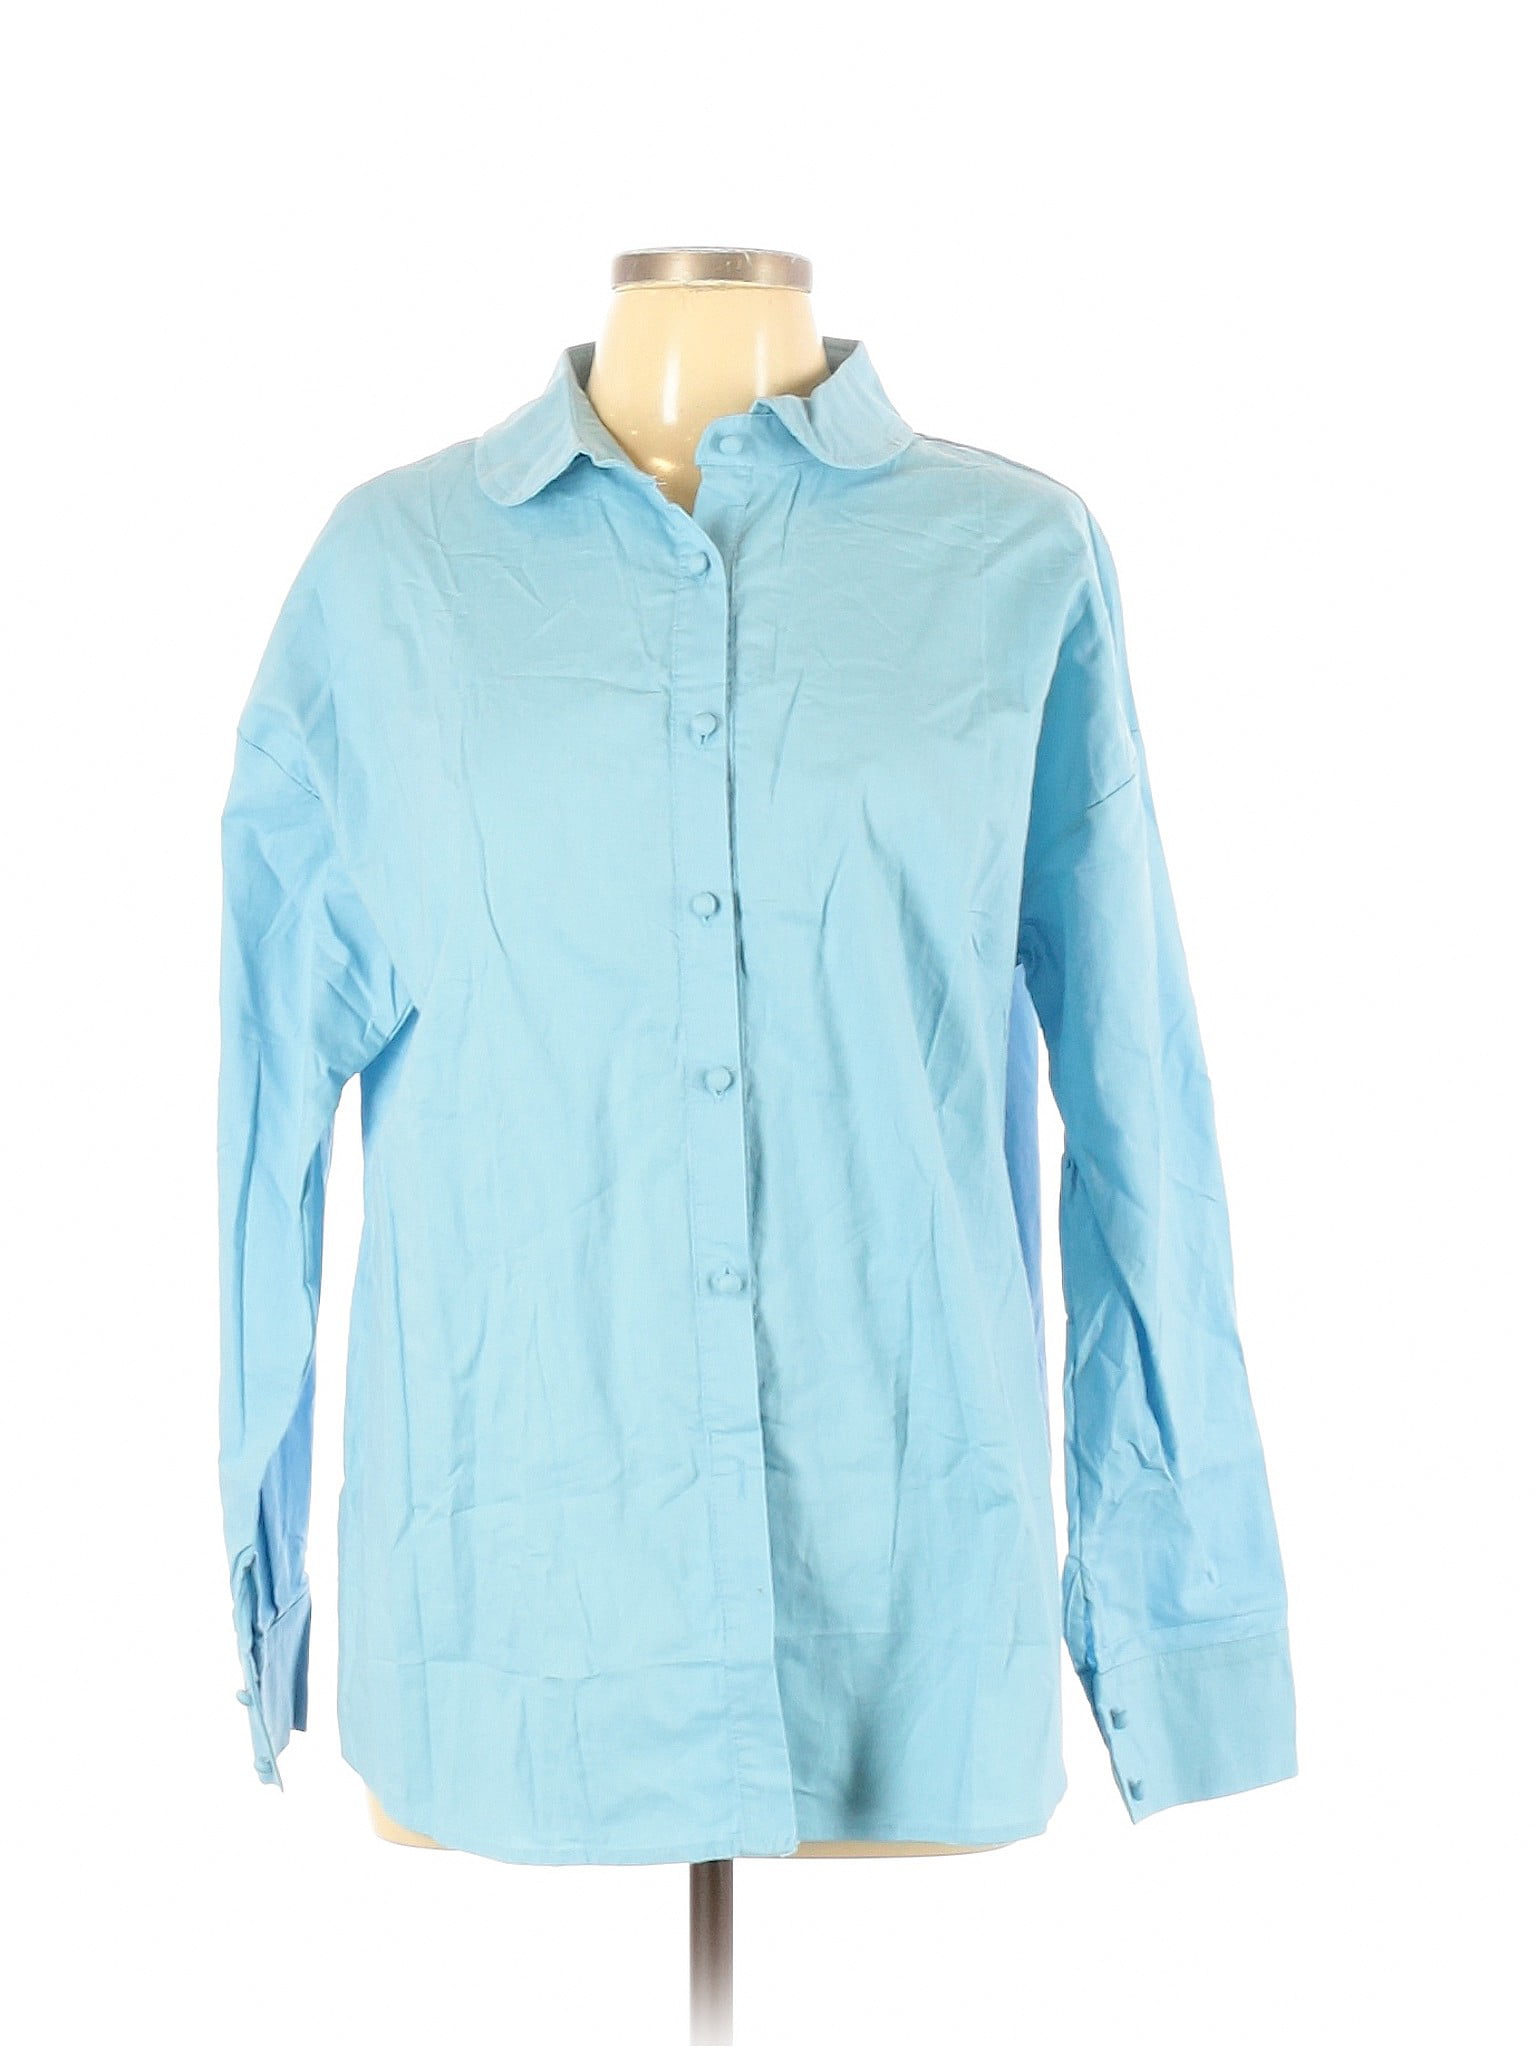 Misslook - Pre-Owned Misslook Women's Size 2X Plus Long Sleeve Button ...